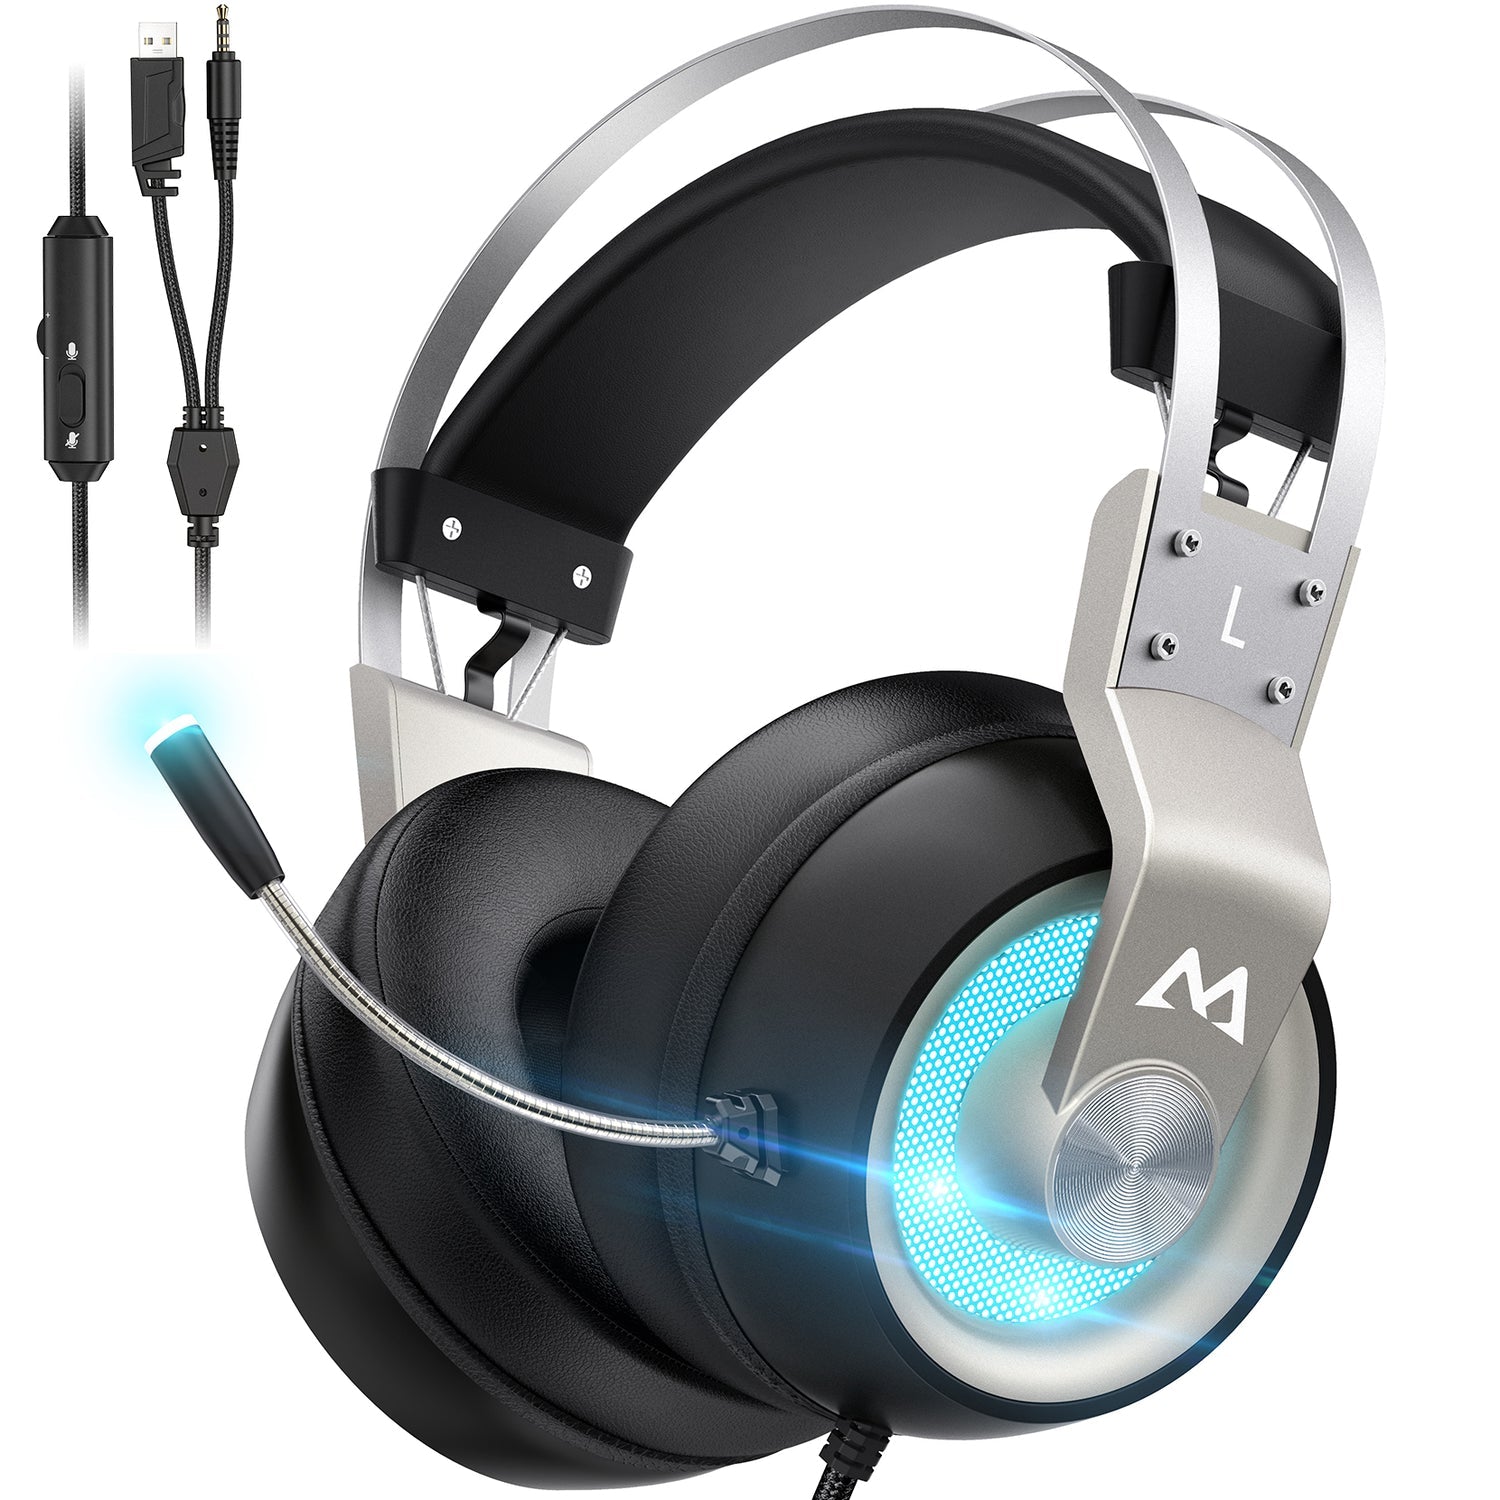 Mpow EG3 Pro Gaming Headset USB Wired Headphones Stereo Mic, Black/Silver